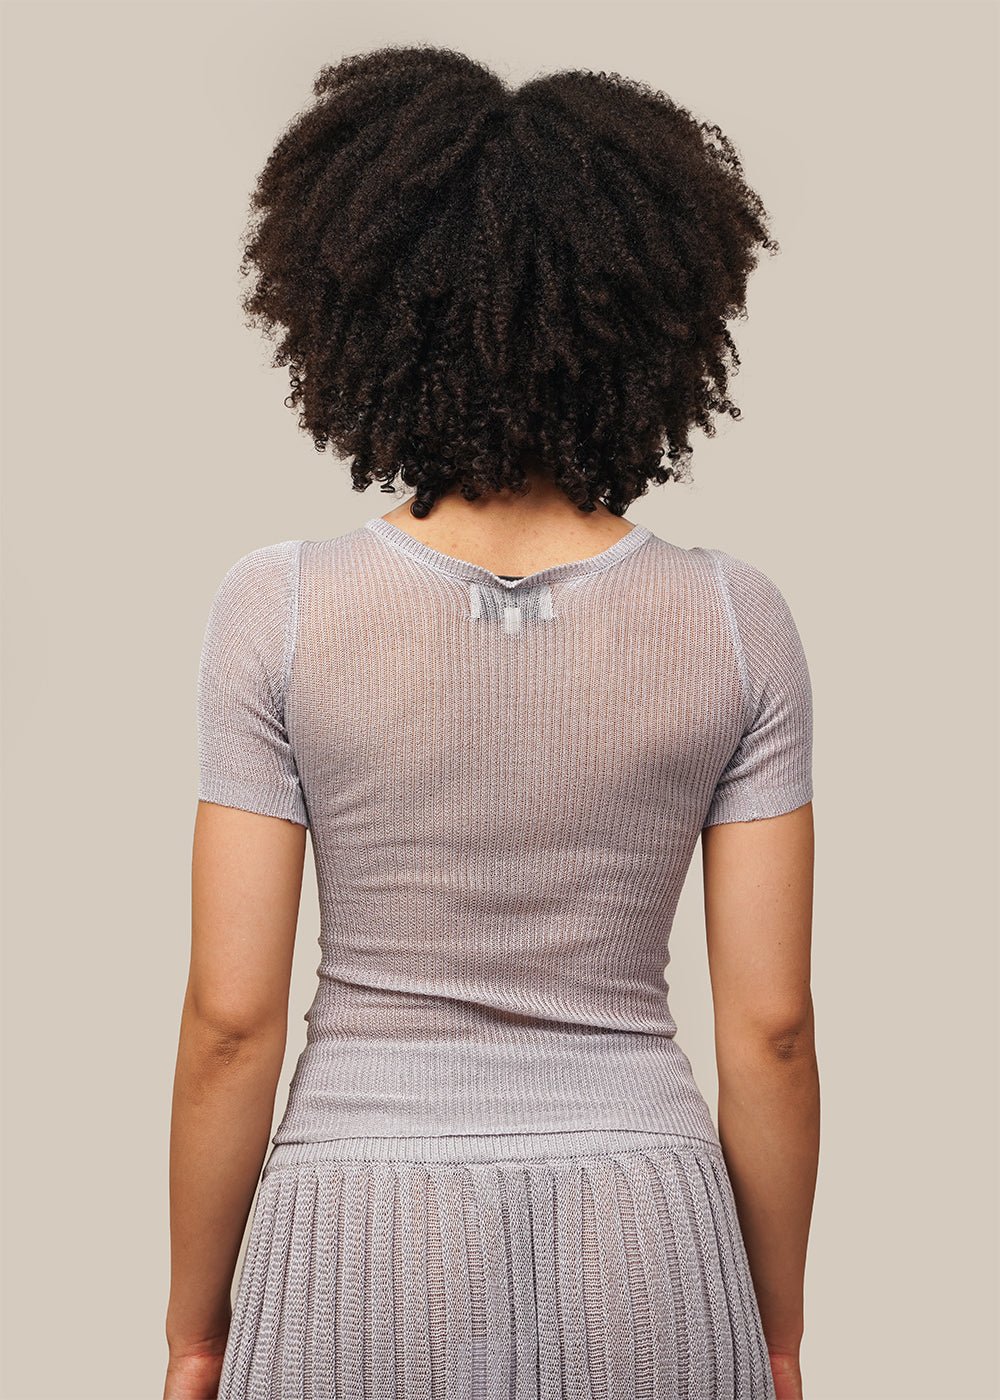 Belle The Label Silver Yara Knit Top - New Classics Studios Sustainable Ethical Fashion Canada